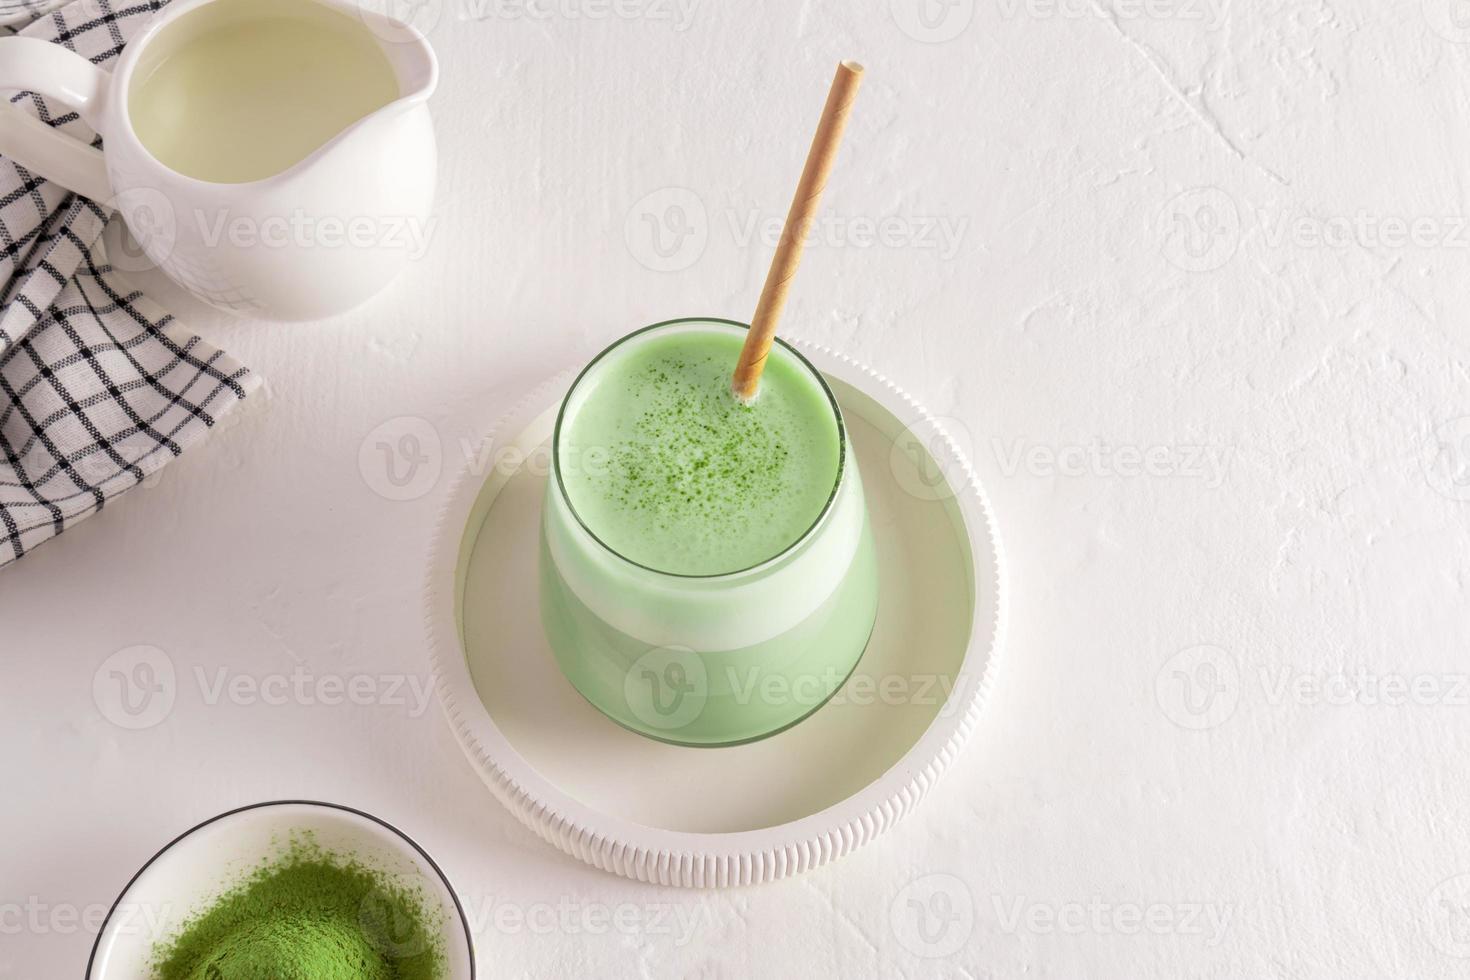 https://static.vecteezy.com/system/resources/previews/017/185/915/non_2x/delicious-healthy-matcha-latte-tea-in-a-glass-of-straw-on-a-ceramic-tray-white-background-a-healthy-drink-detox-photo.jpg